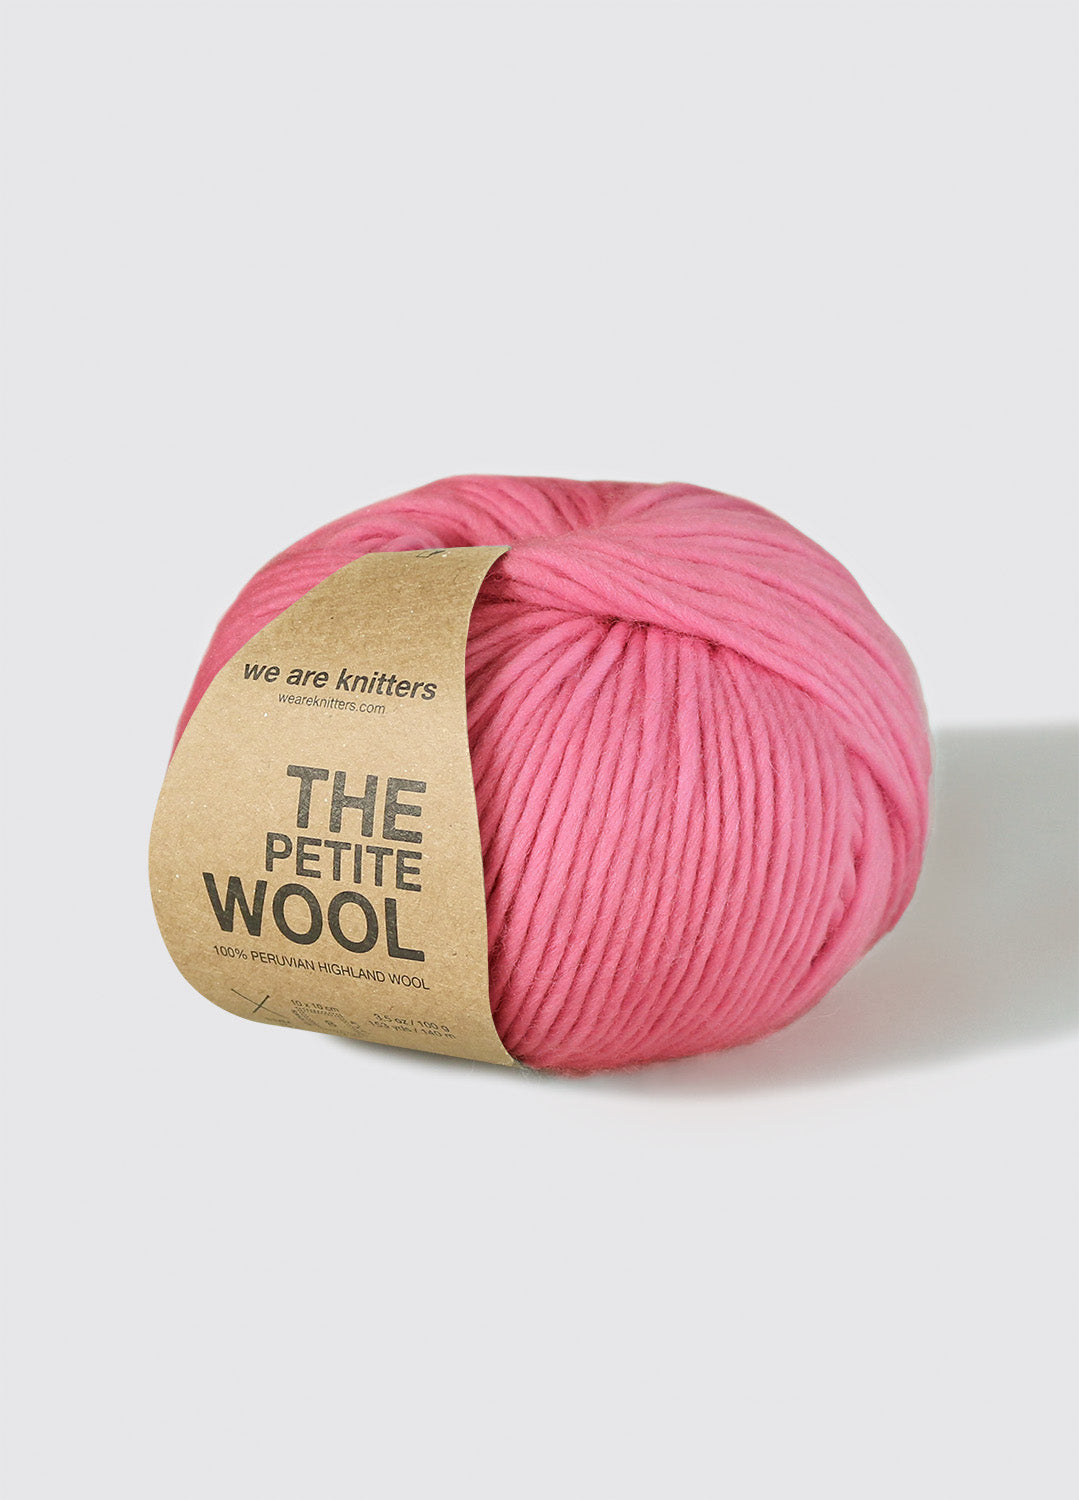 We Are Knitters: craft your joy with yarn and easy and advanced